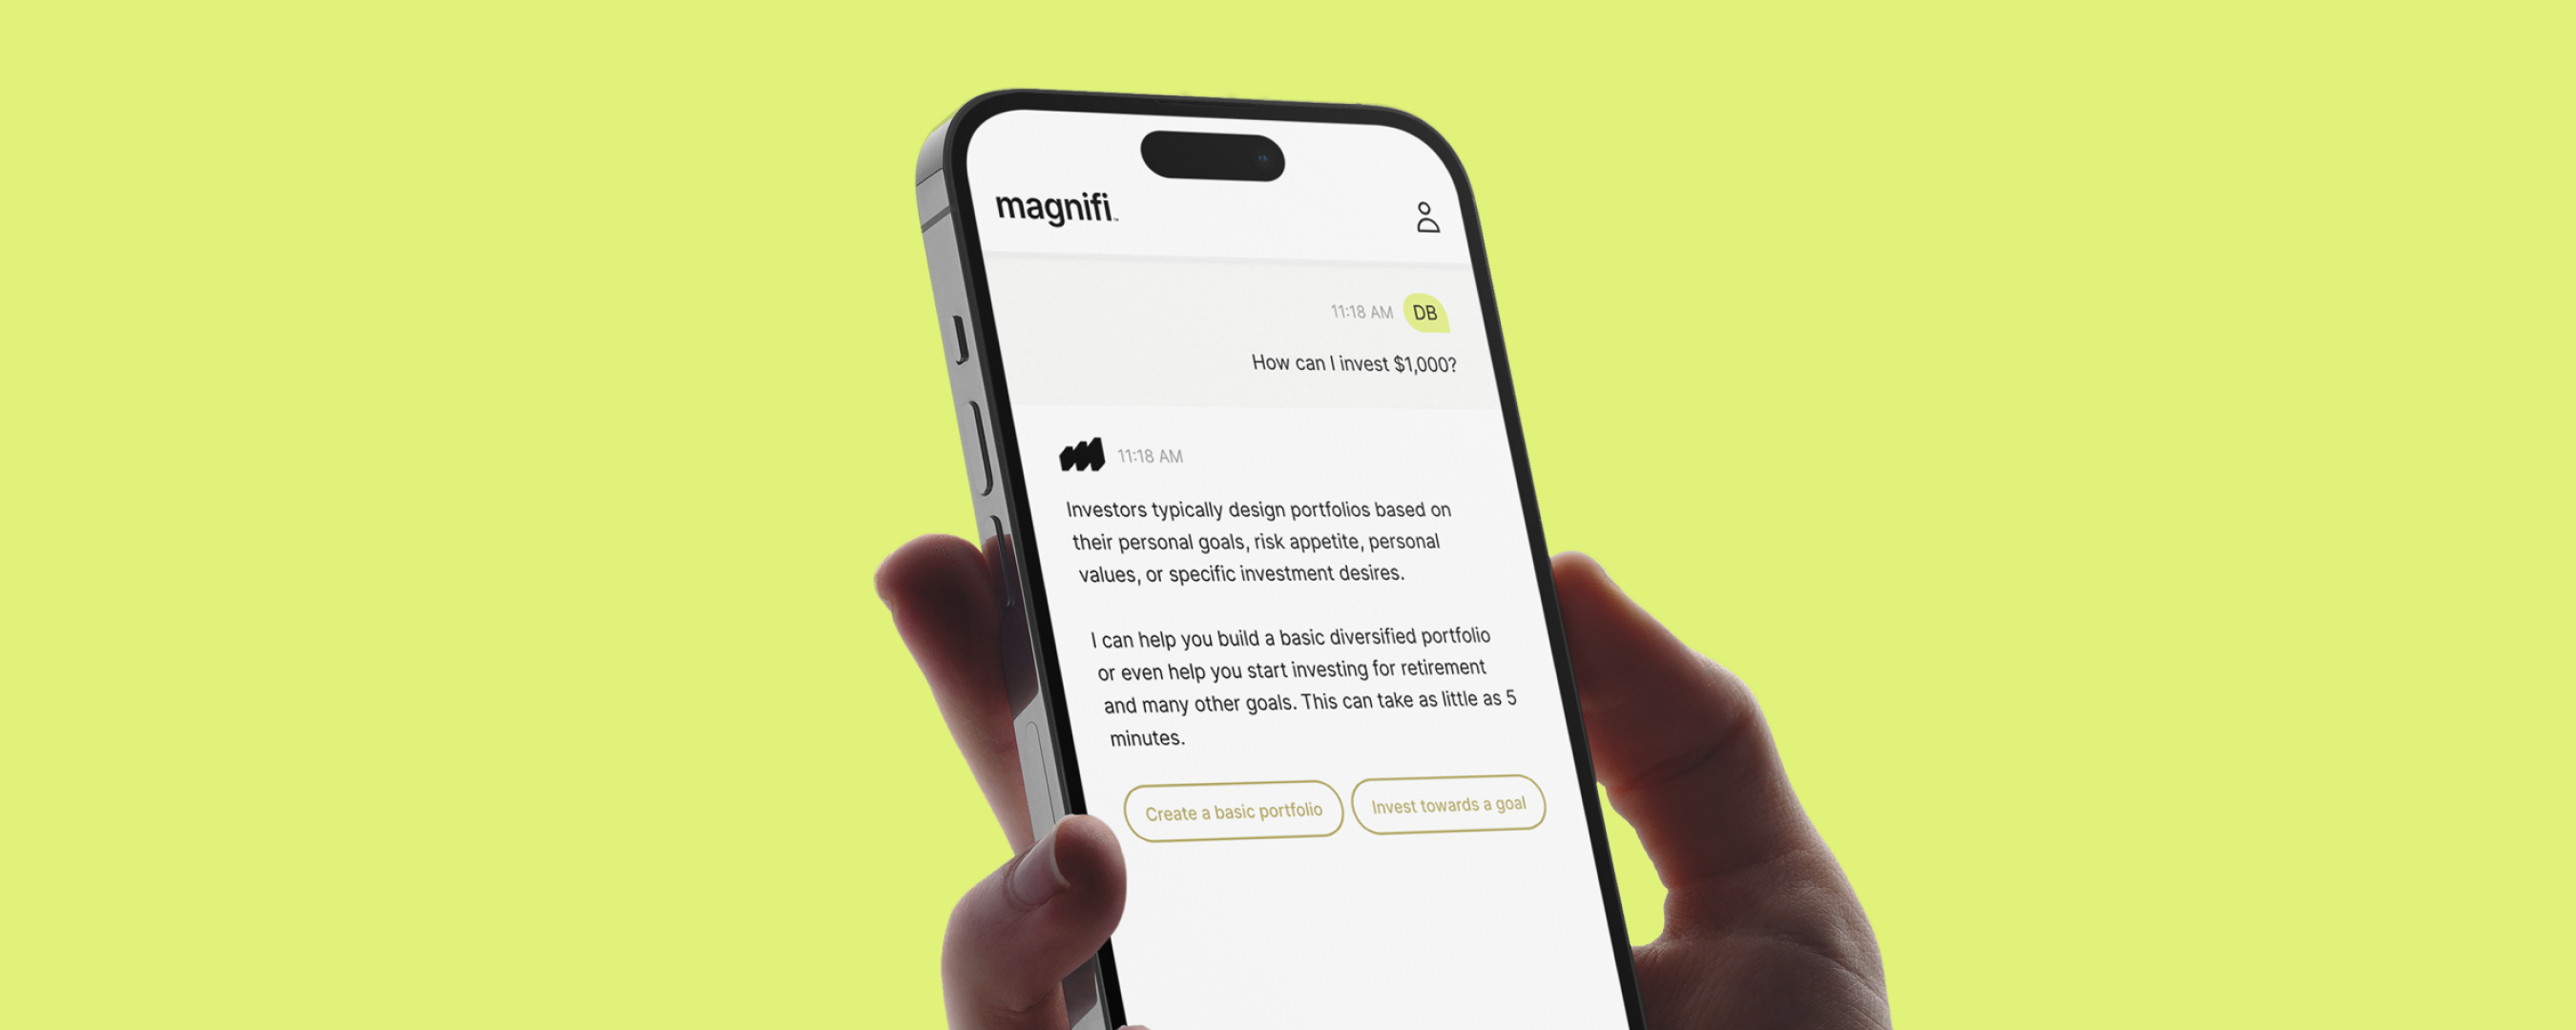 The Magnifi app showing an investor how to invest $1000